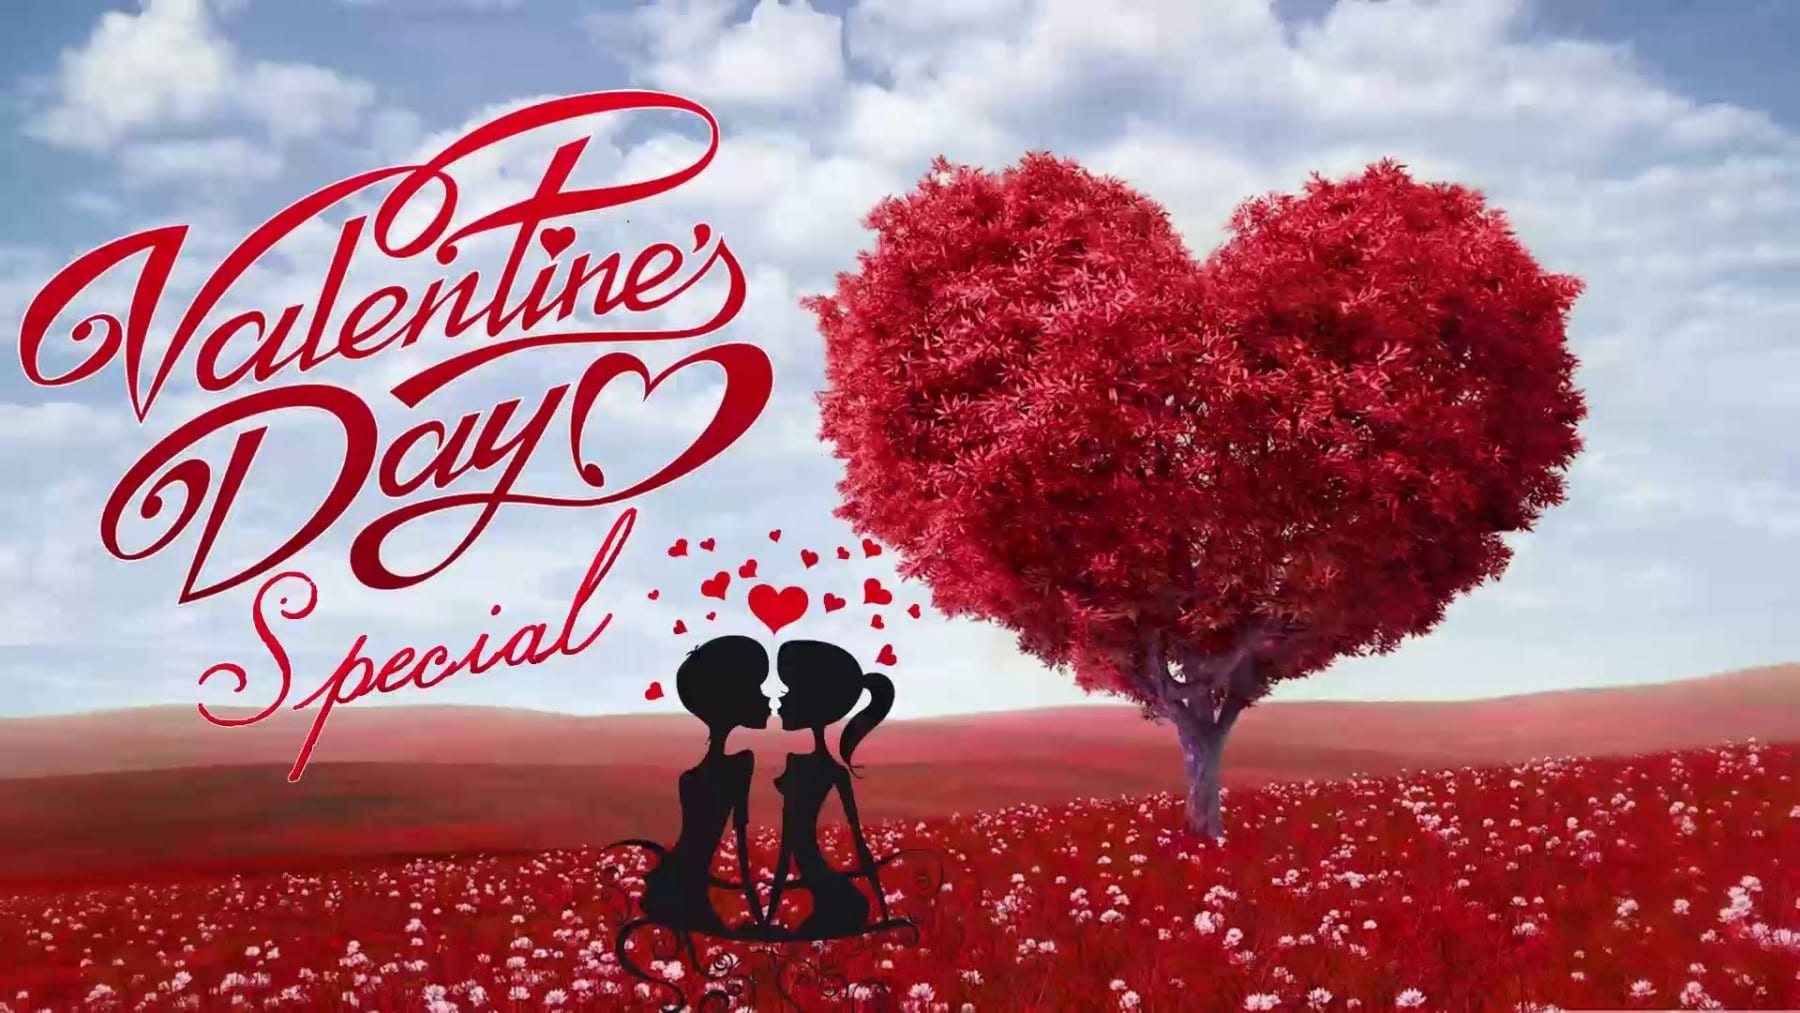 Happy Valentine's Day 2020 HD Pictures, Images, Wallpapers ...